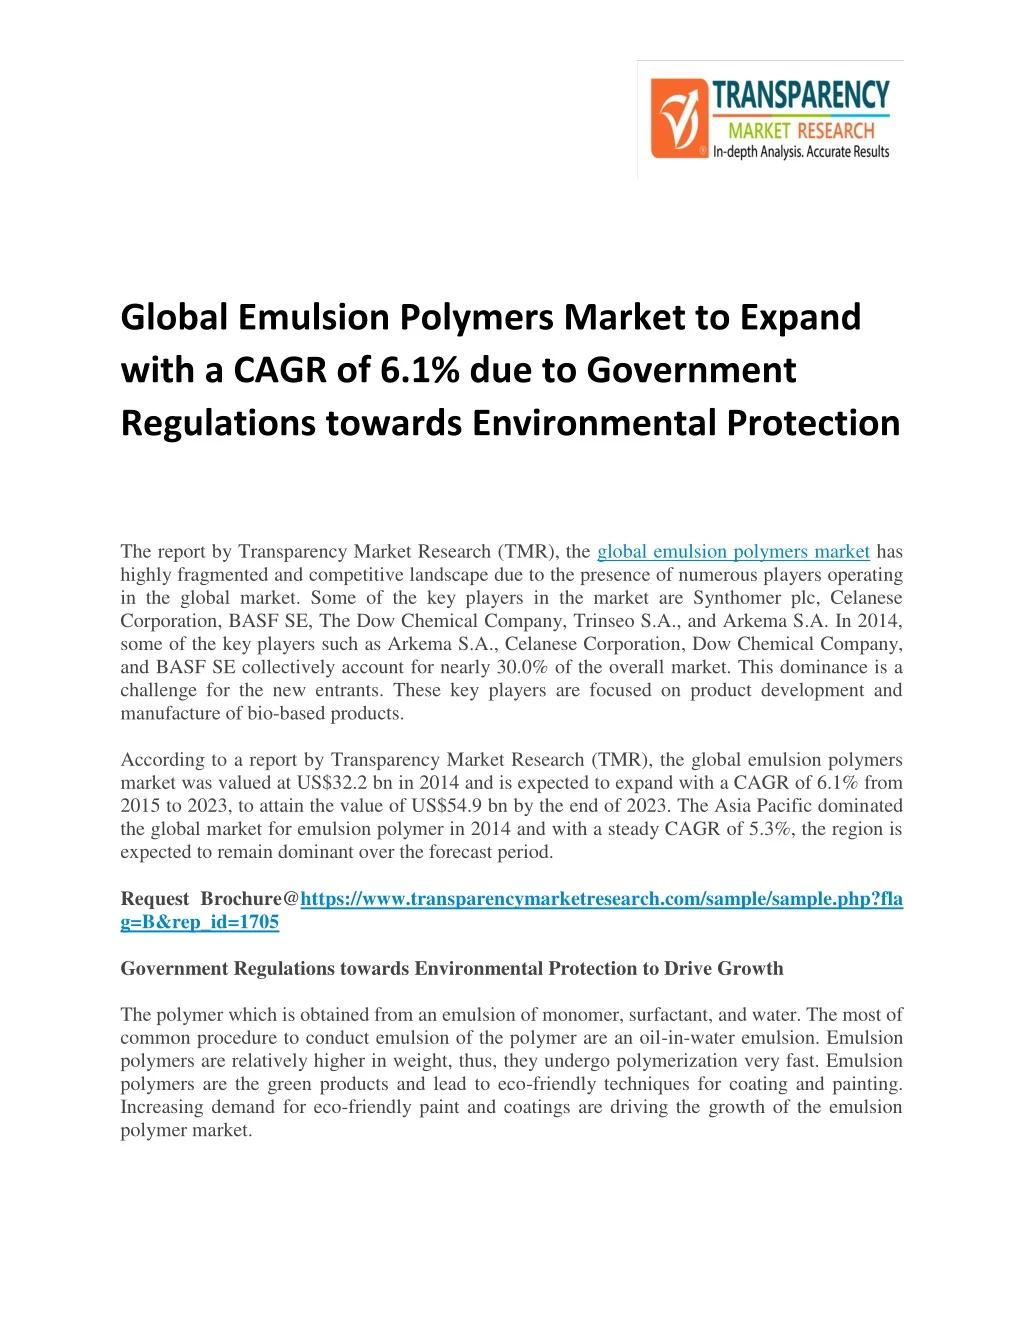 global emulsion polymers market to expand with